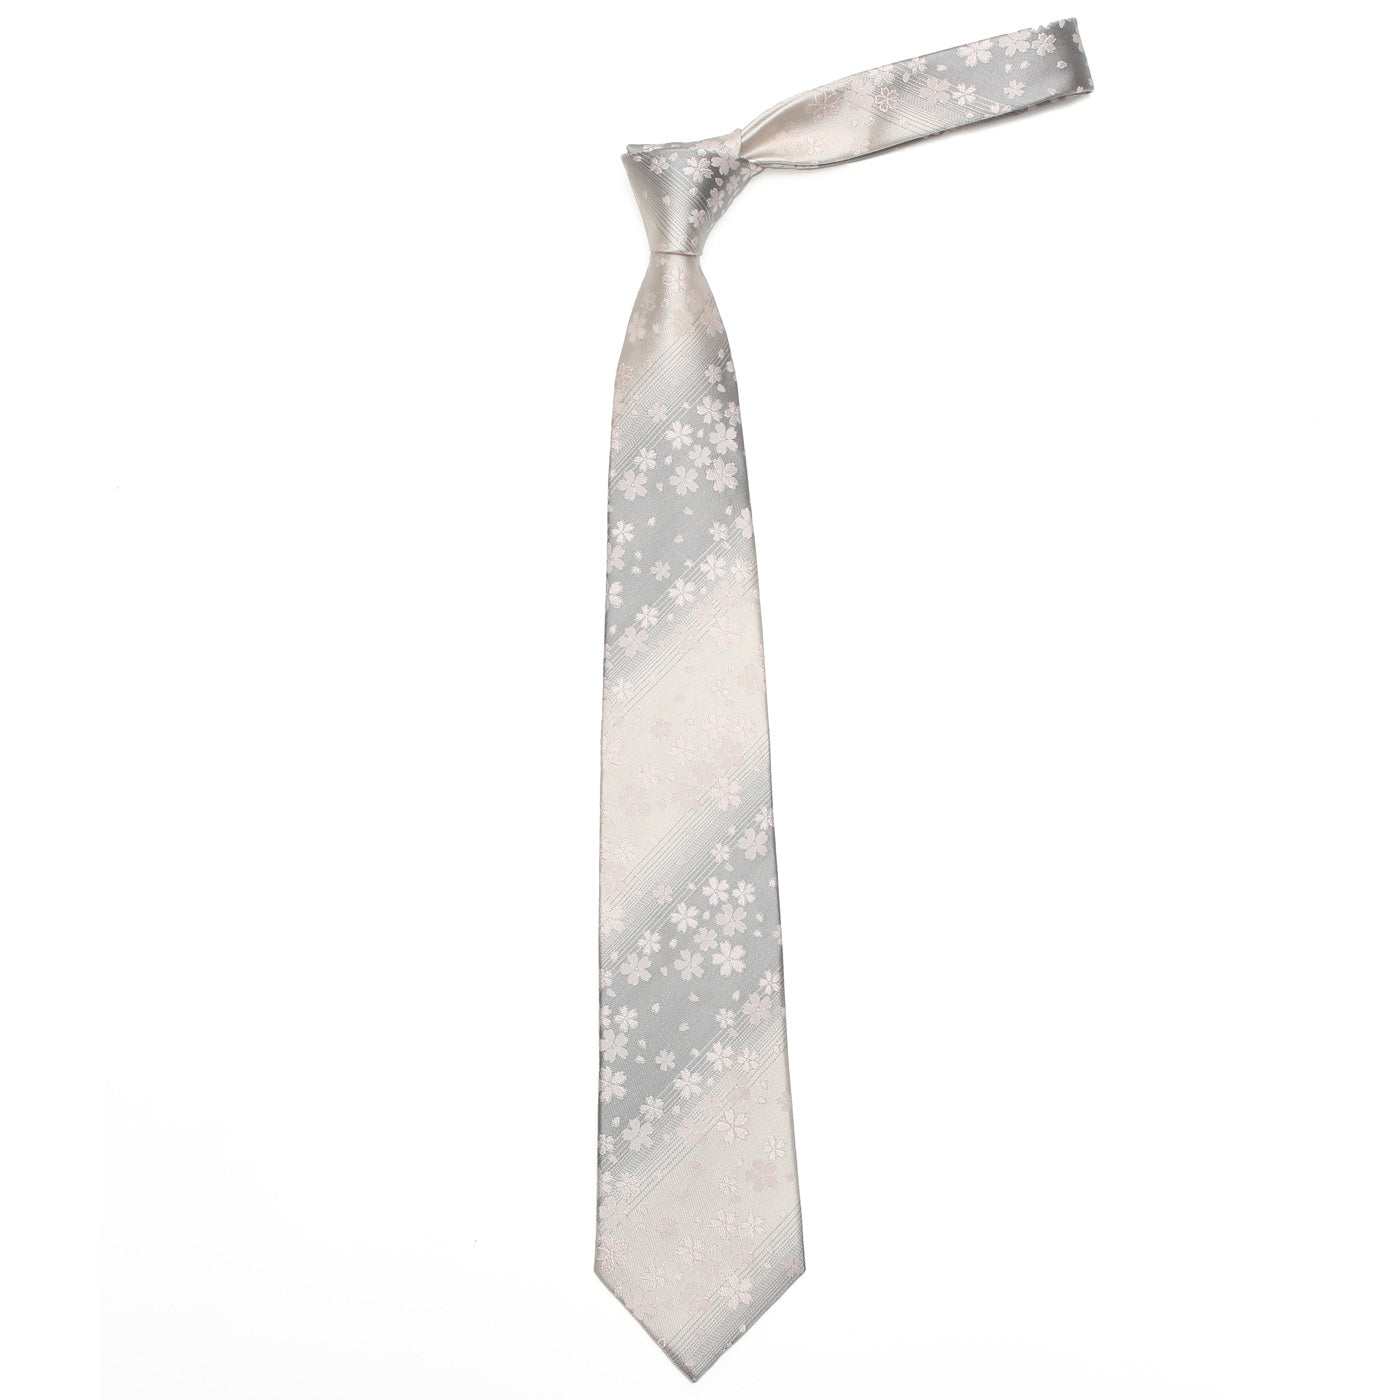 Men’s Jacquard Woven 100% Kyoto Silk Tie -24. Eternal Beauty- Cherry Blossoms Pattern Made in Japan FORTUNA Tokyo